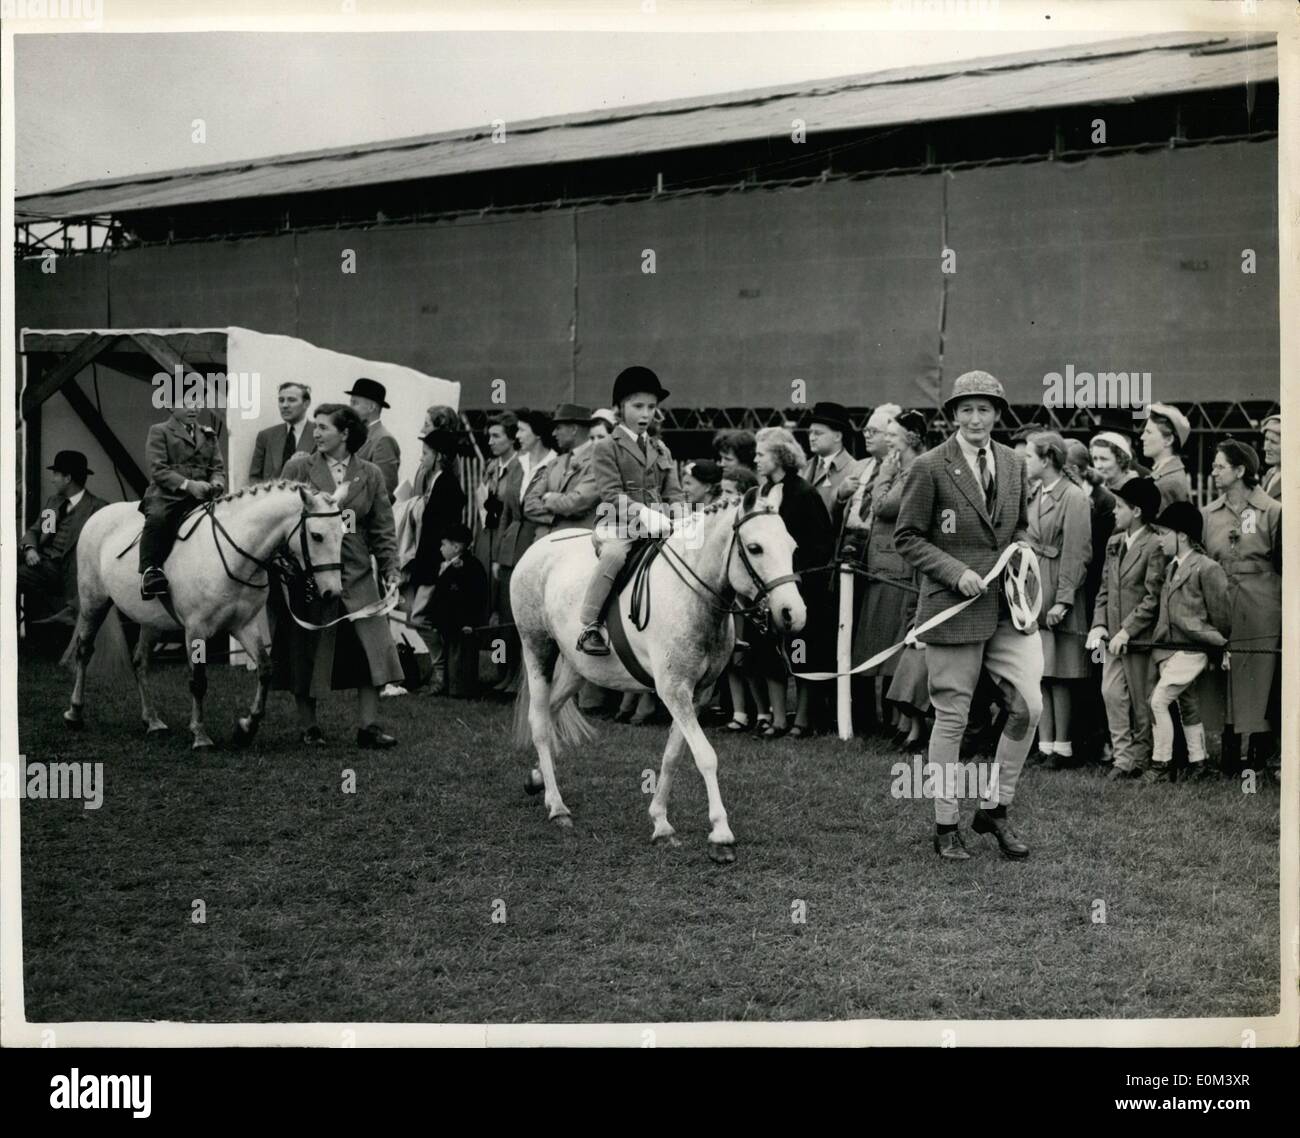 Jun. 06, 1953 - Richard Royal Horse Show Leading Rein Class 15: Photo shows. Miss Seeina Horman riding Glen Mist leads Master David Wilson (aged 6) riding Gotton Tail-during the Leading Rein Class at the Richmond Royal Horse Show. Stock Photo